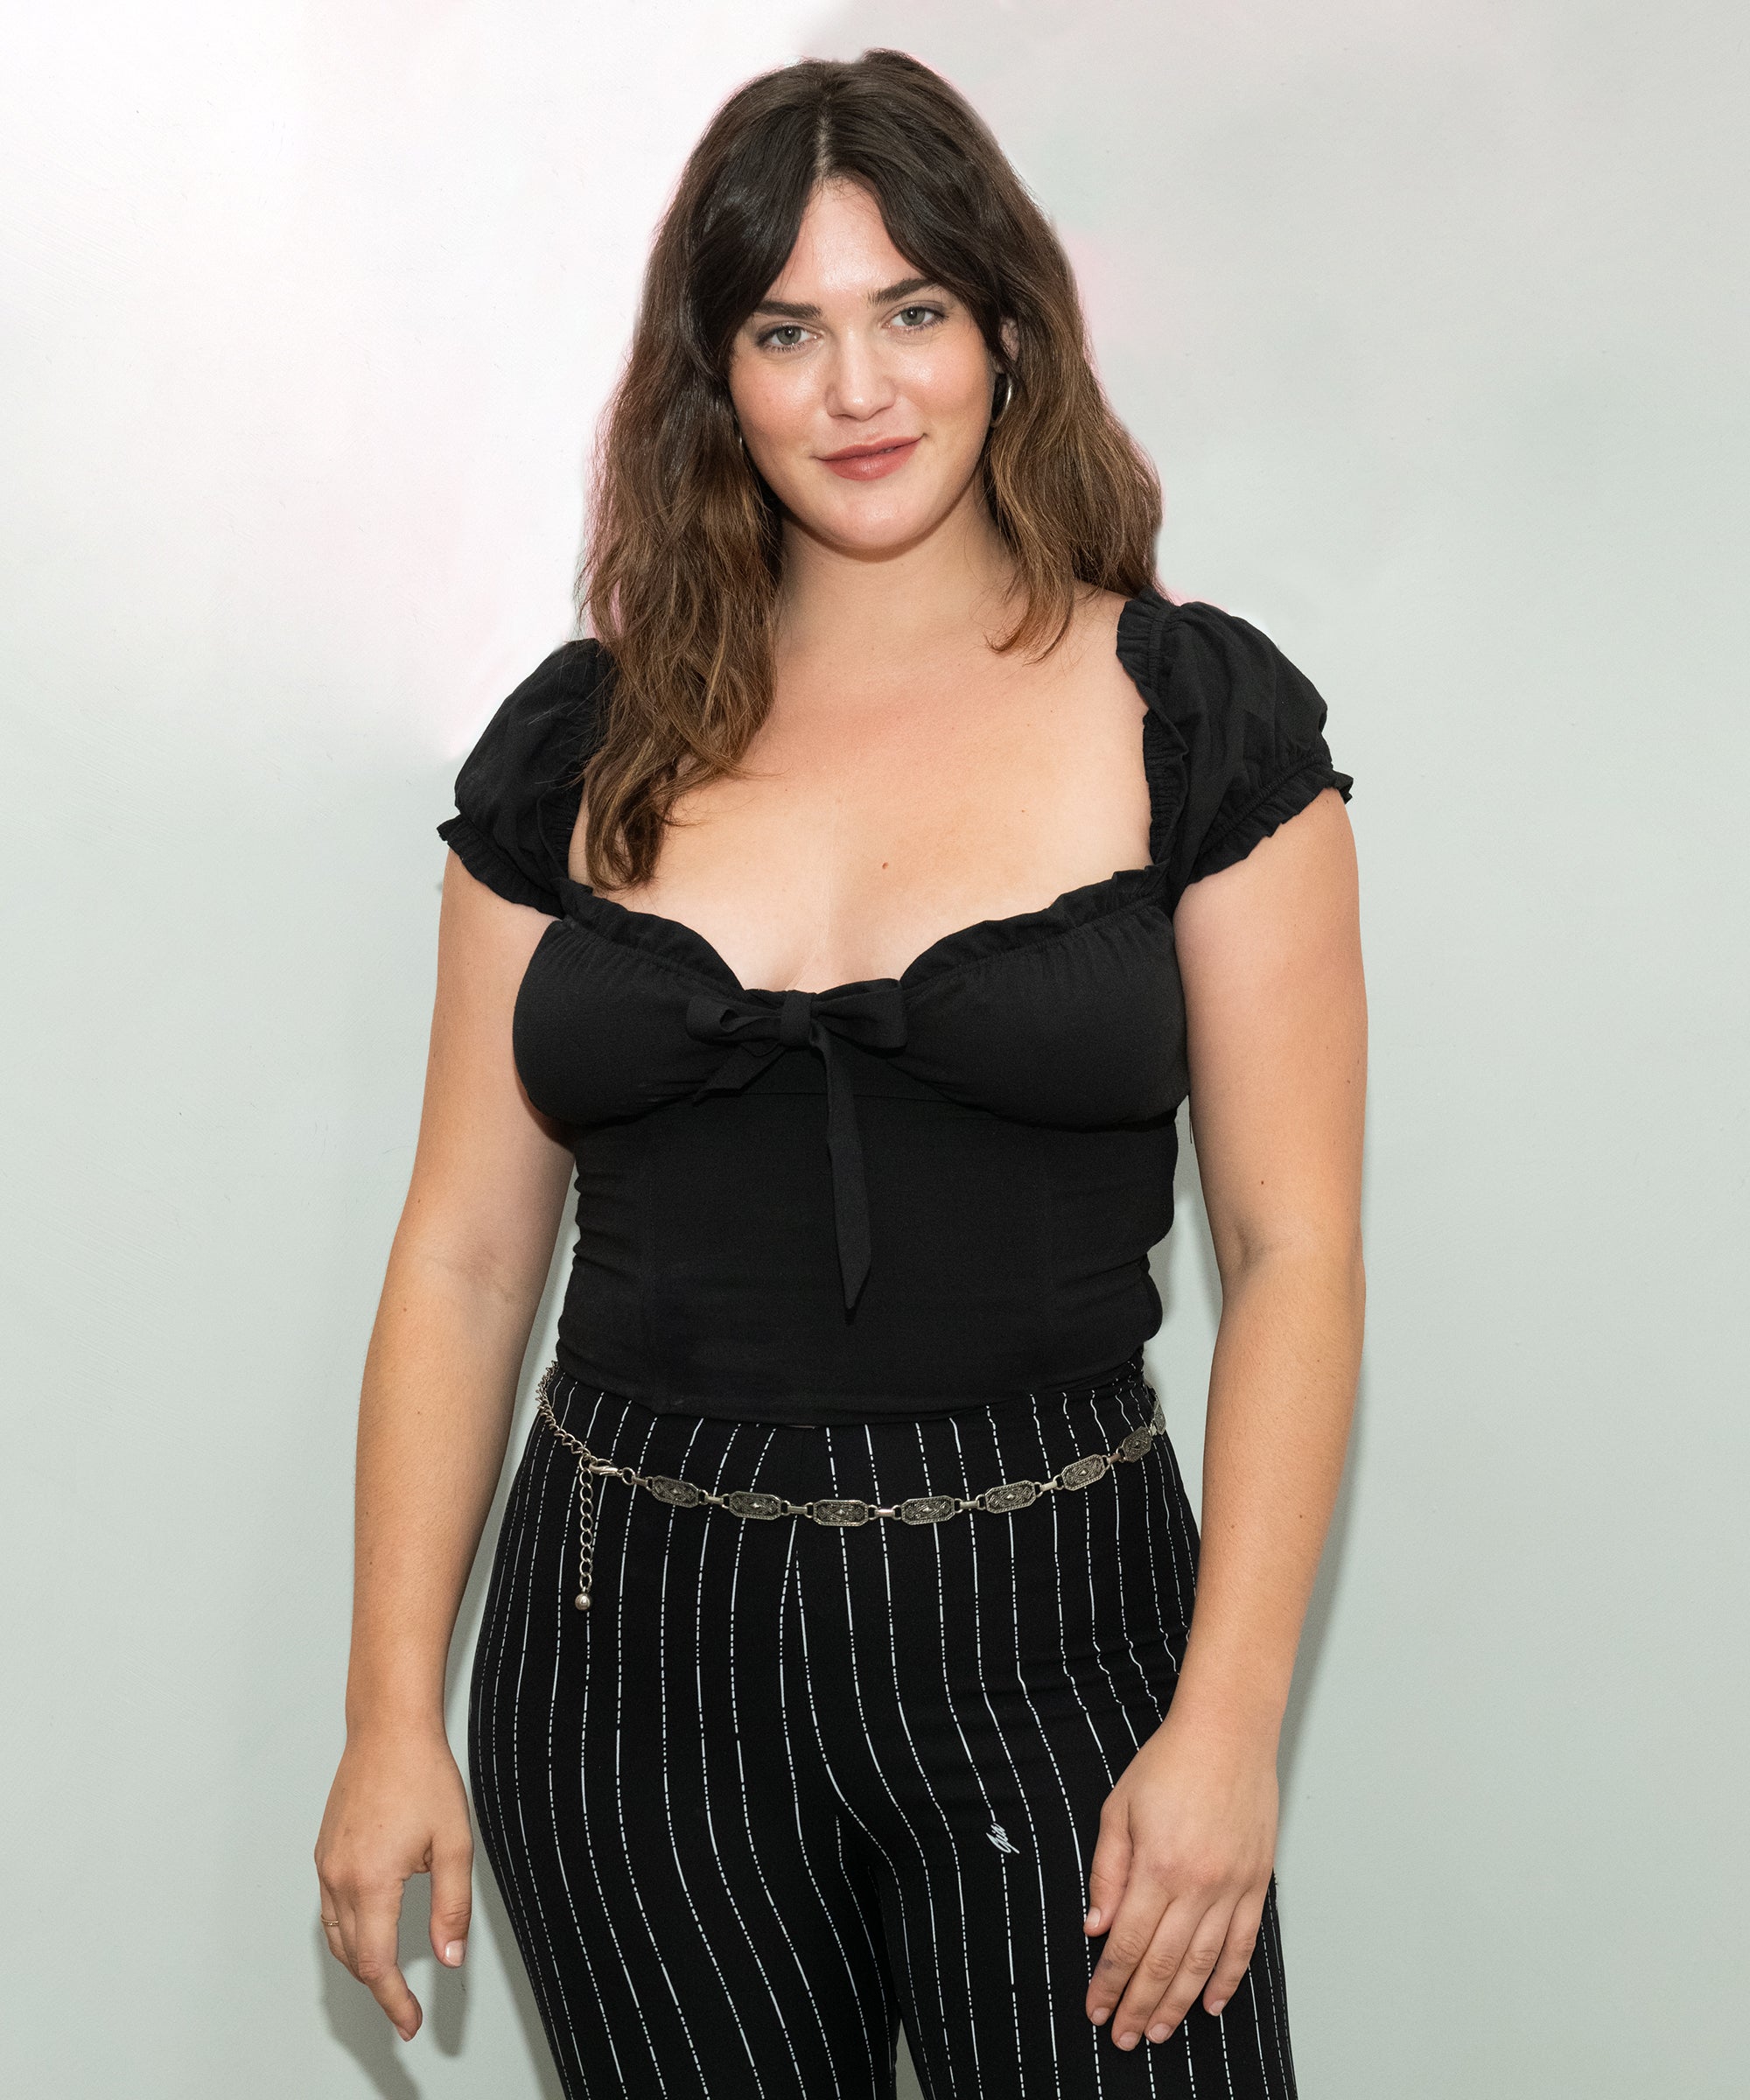 Does Victoria's Secret decision to feature a plus-size model in